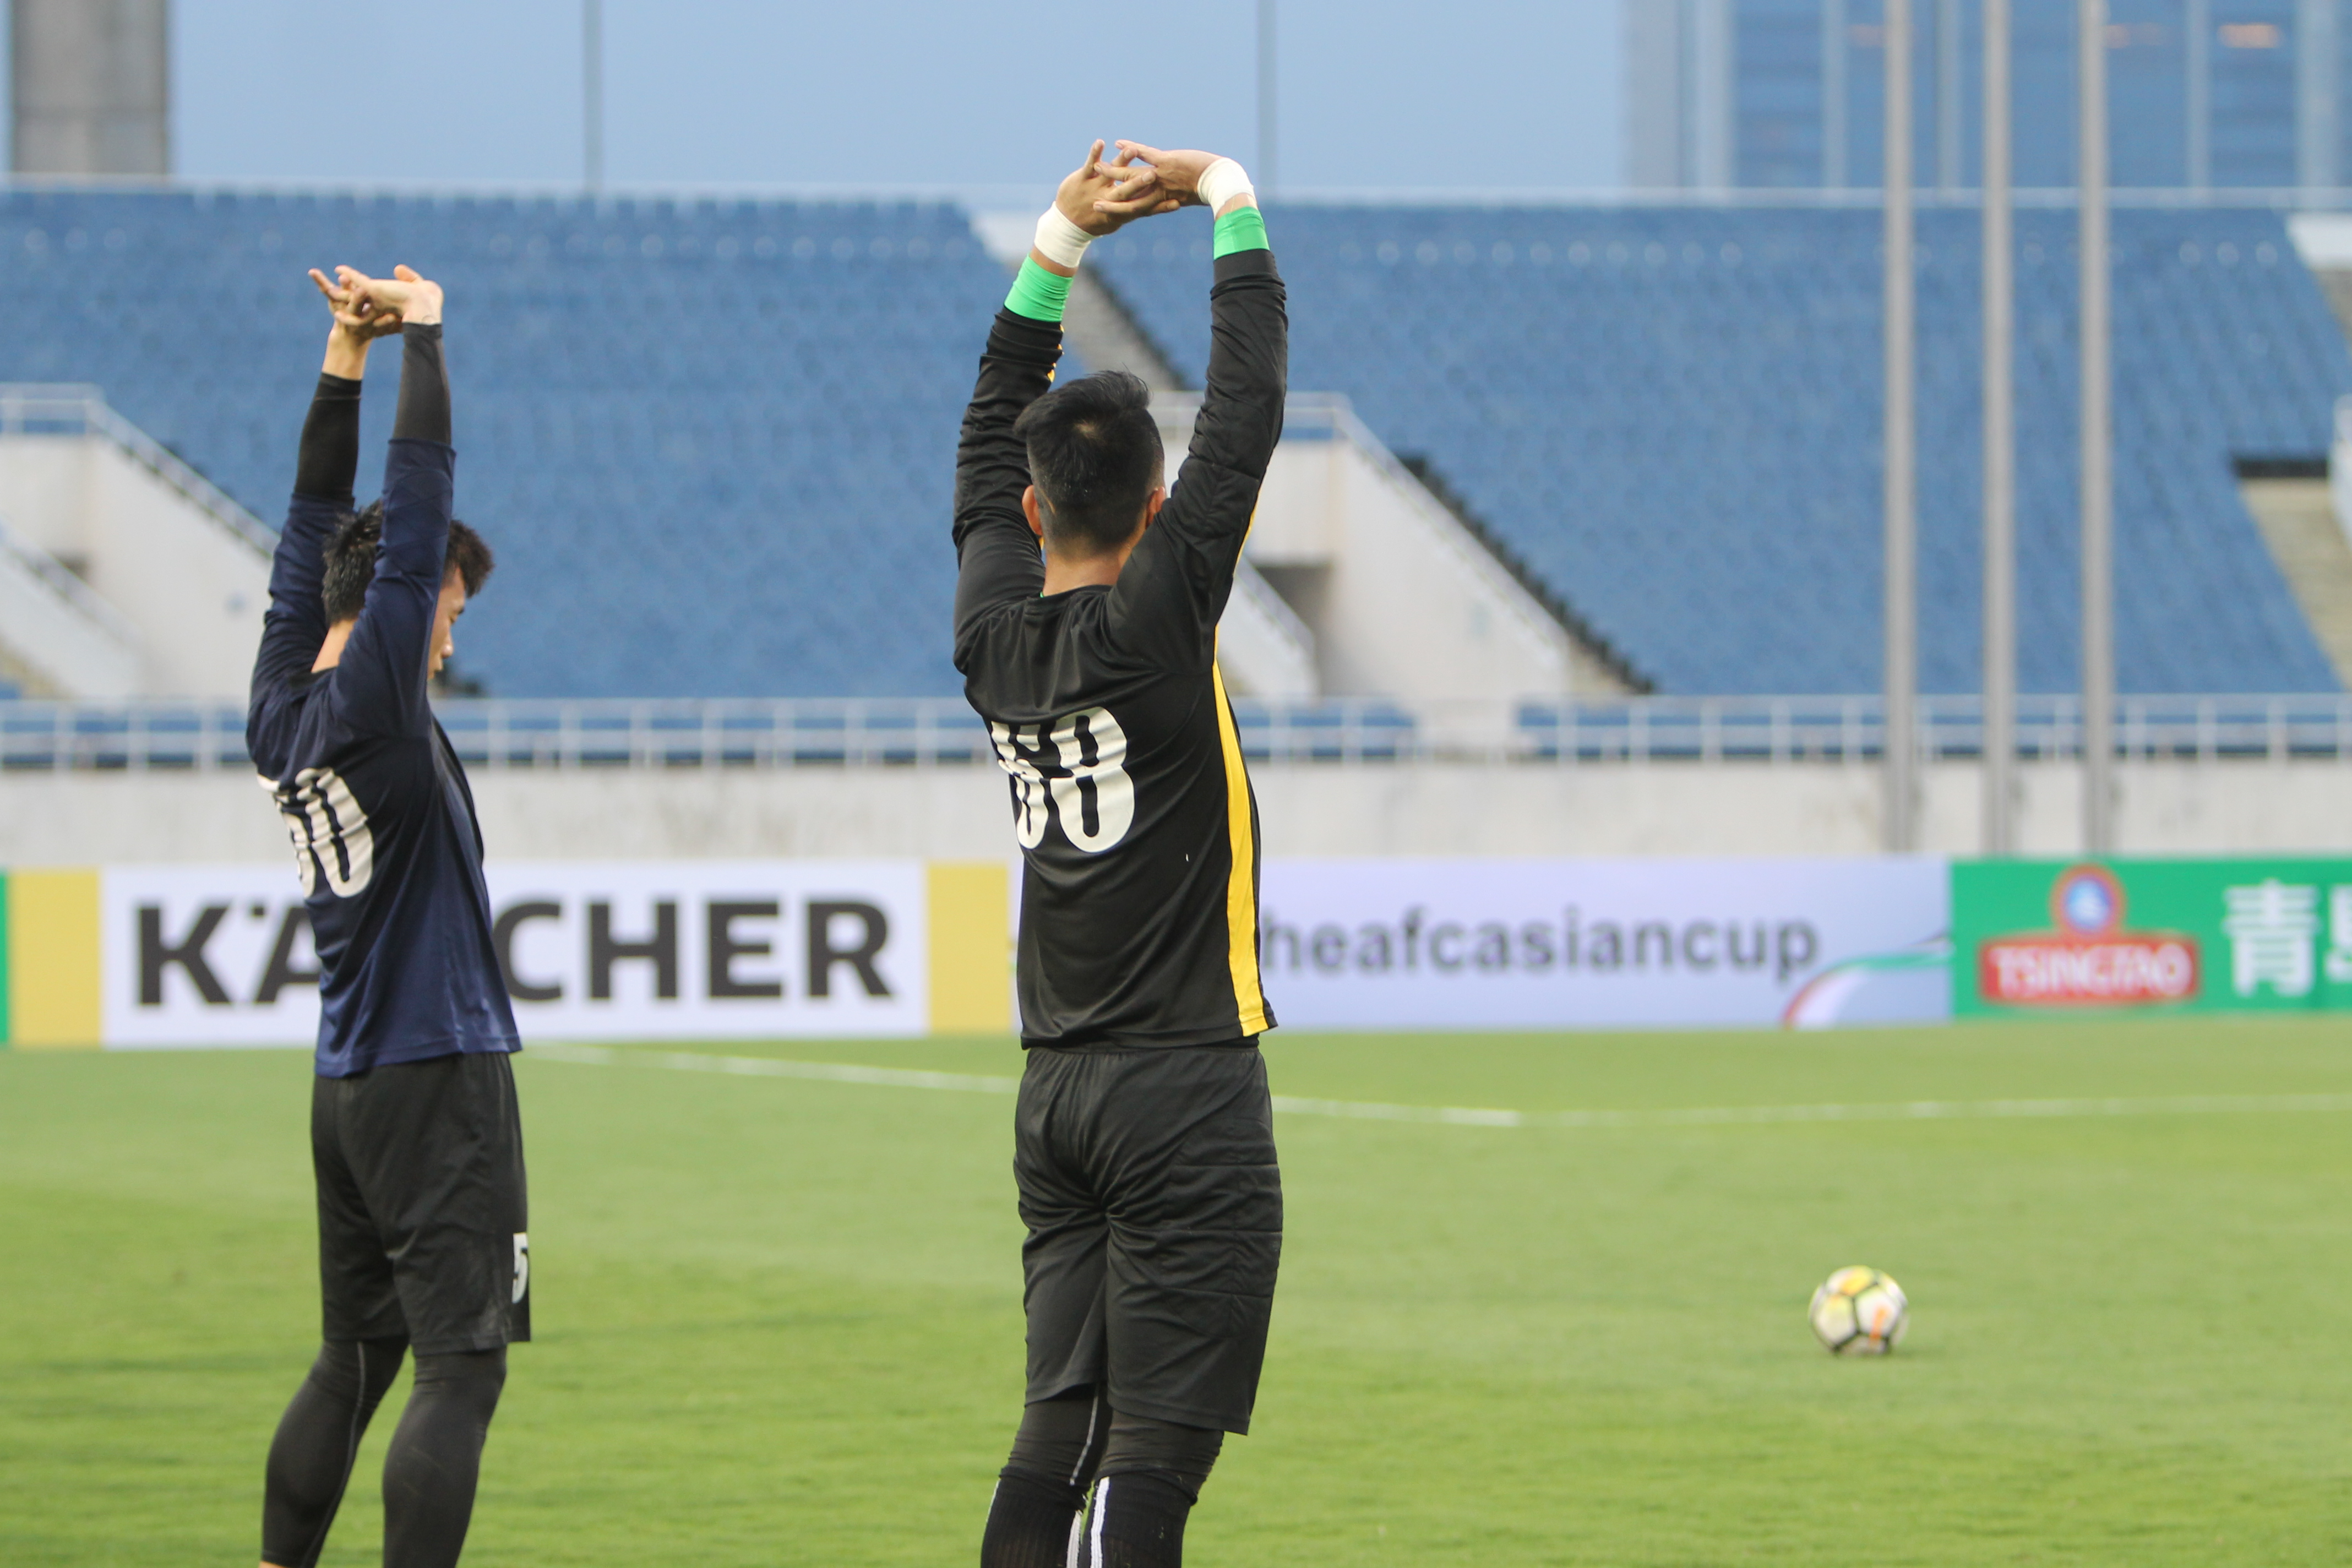 tien dung, flc thanh hoa, yangon united, afc cup